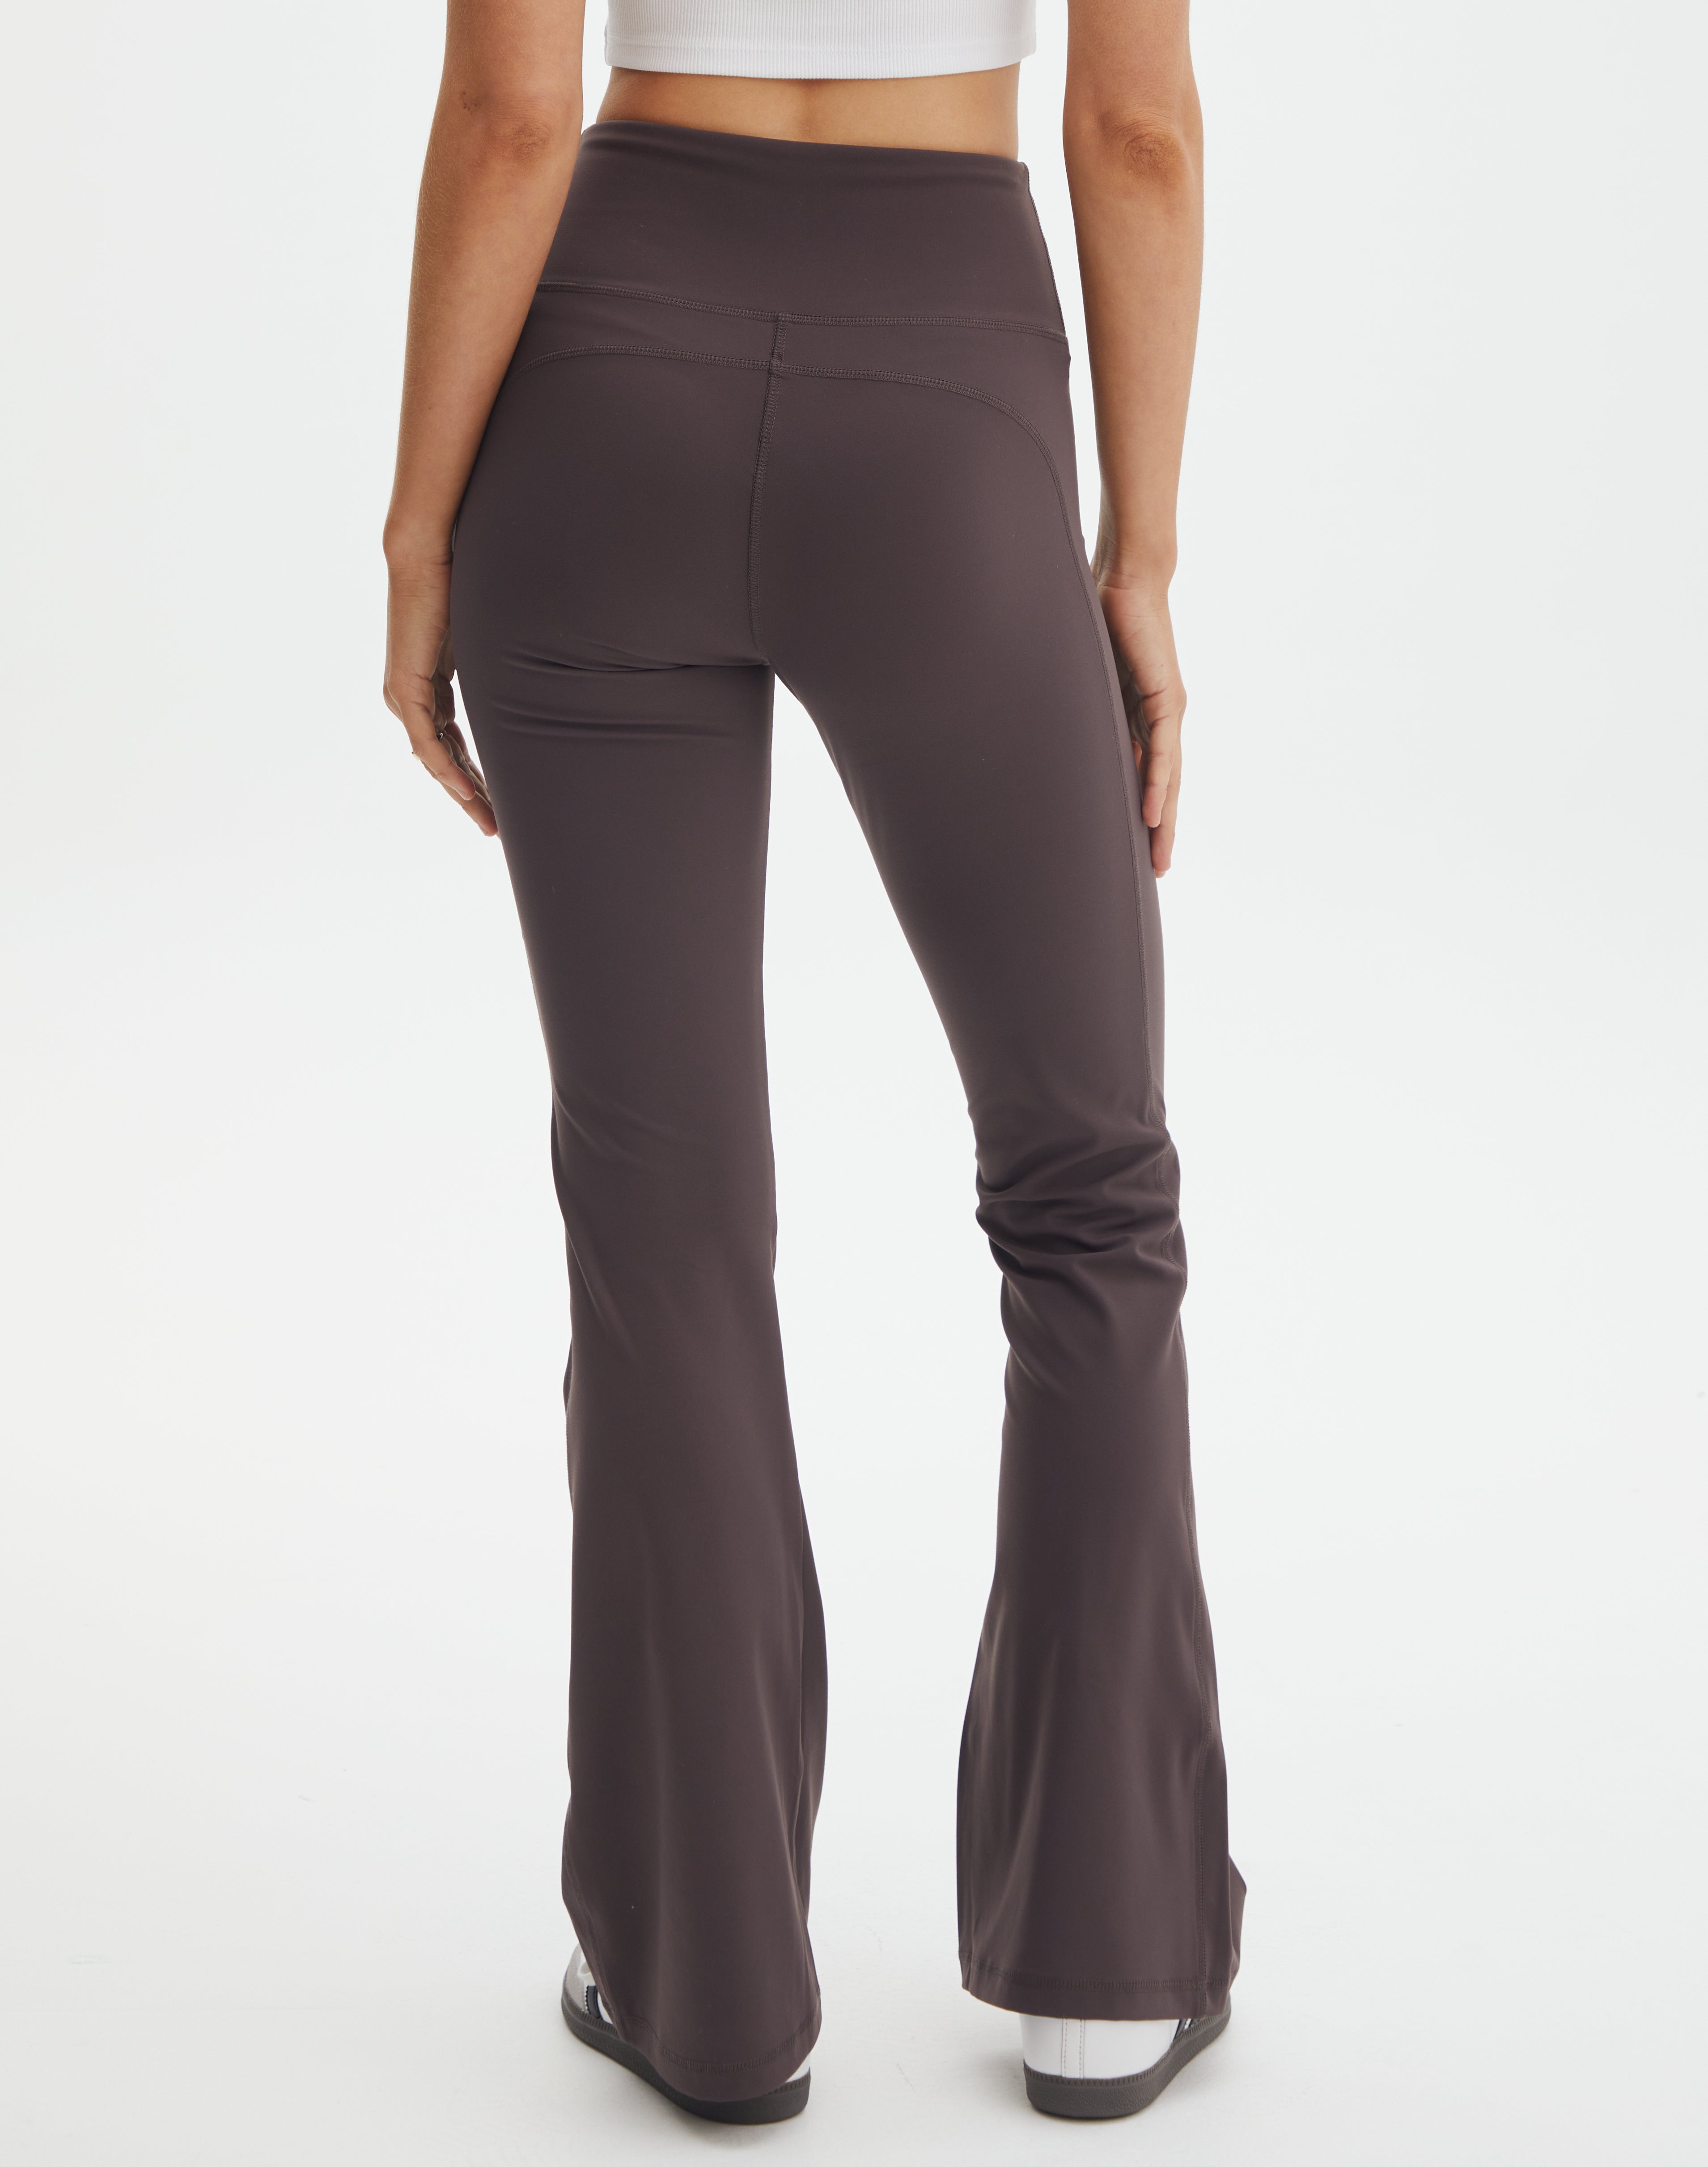 Form Fit Flare Yoga Pant in Its Soy Cute